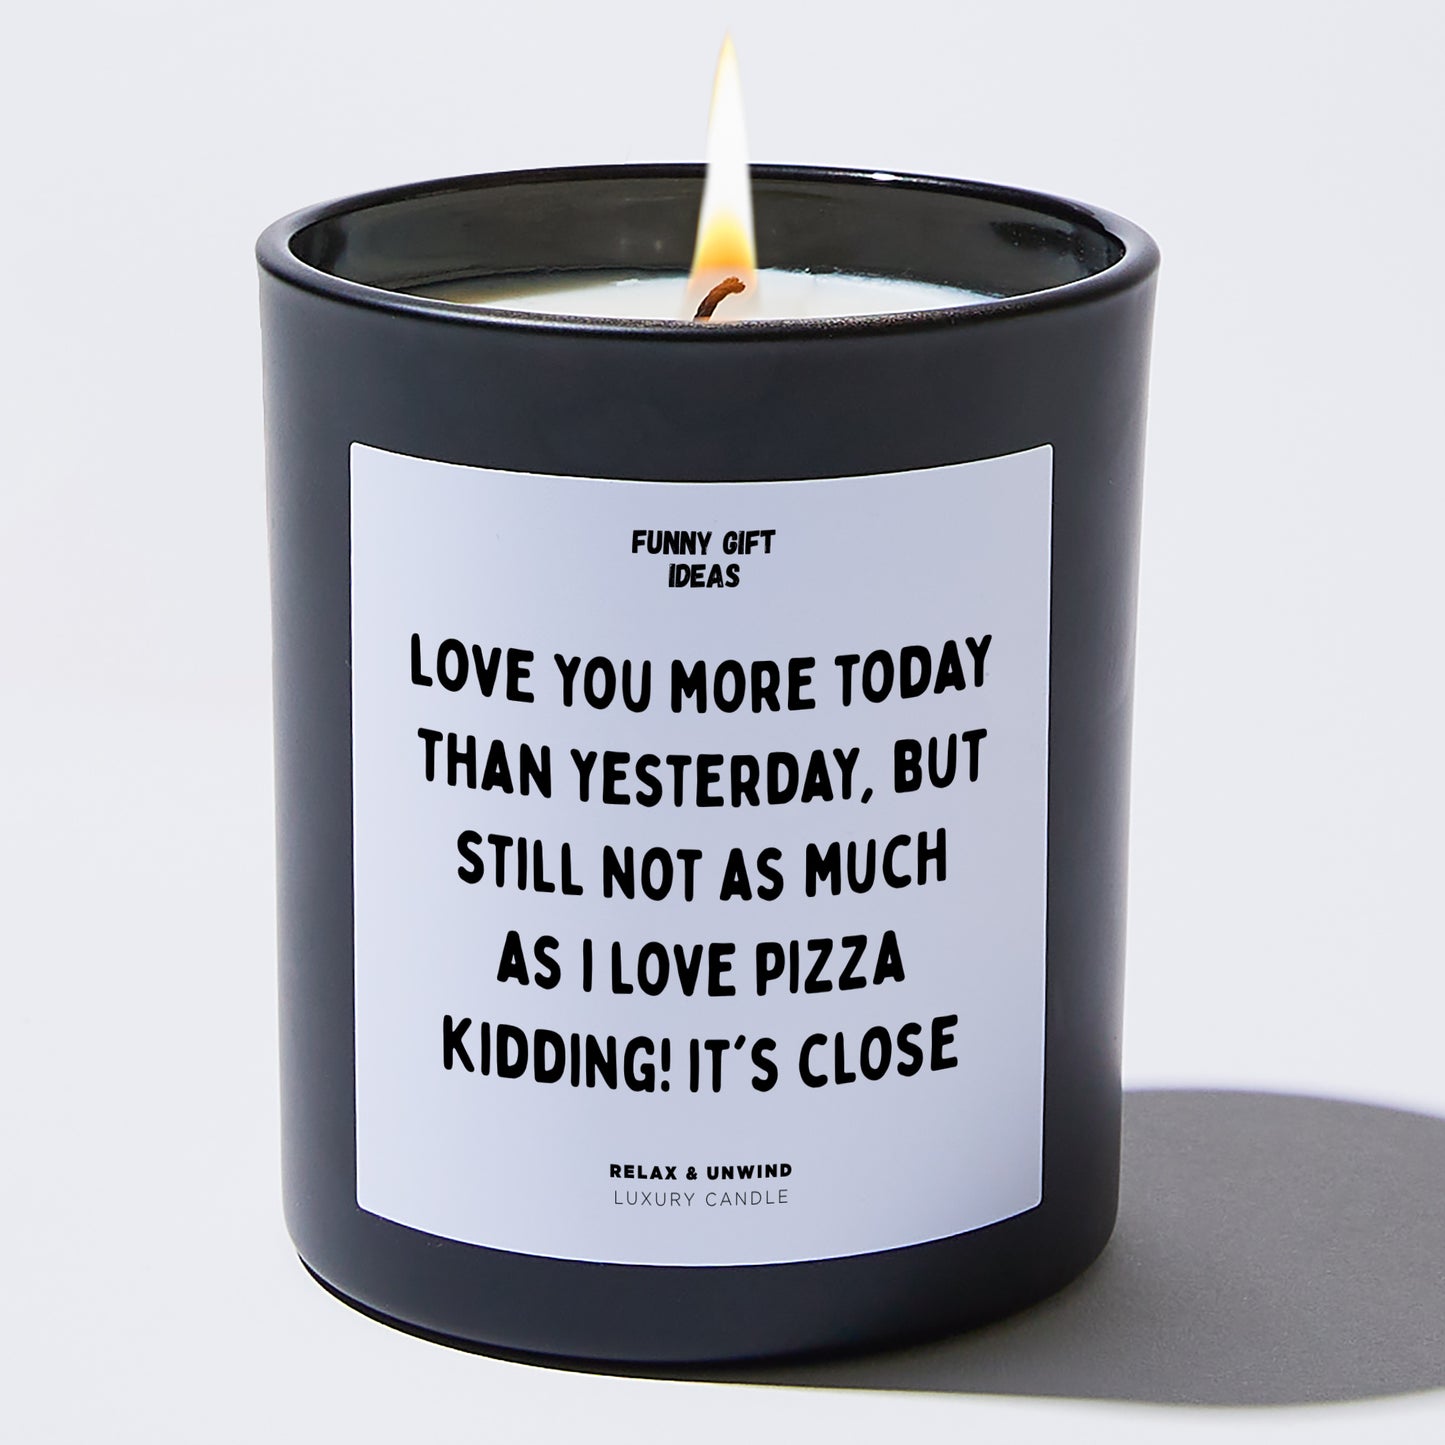 Anniversary Love You More Today Than Yesterday, but Still Not as Much as I Love Pizza. Kidding! It's Close. - Funny Gift Ideas